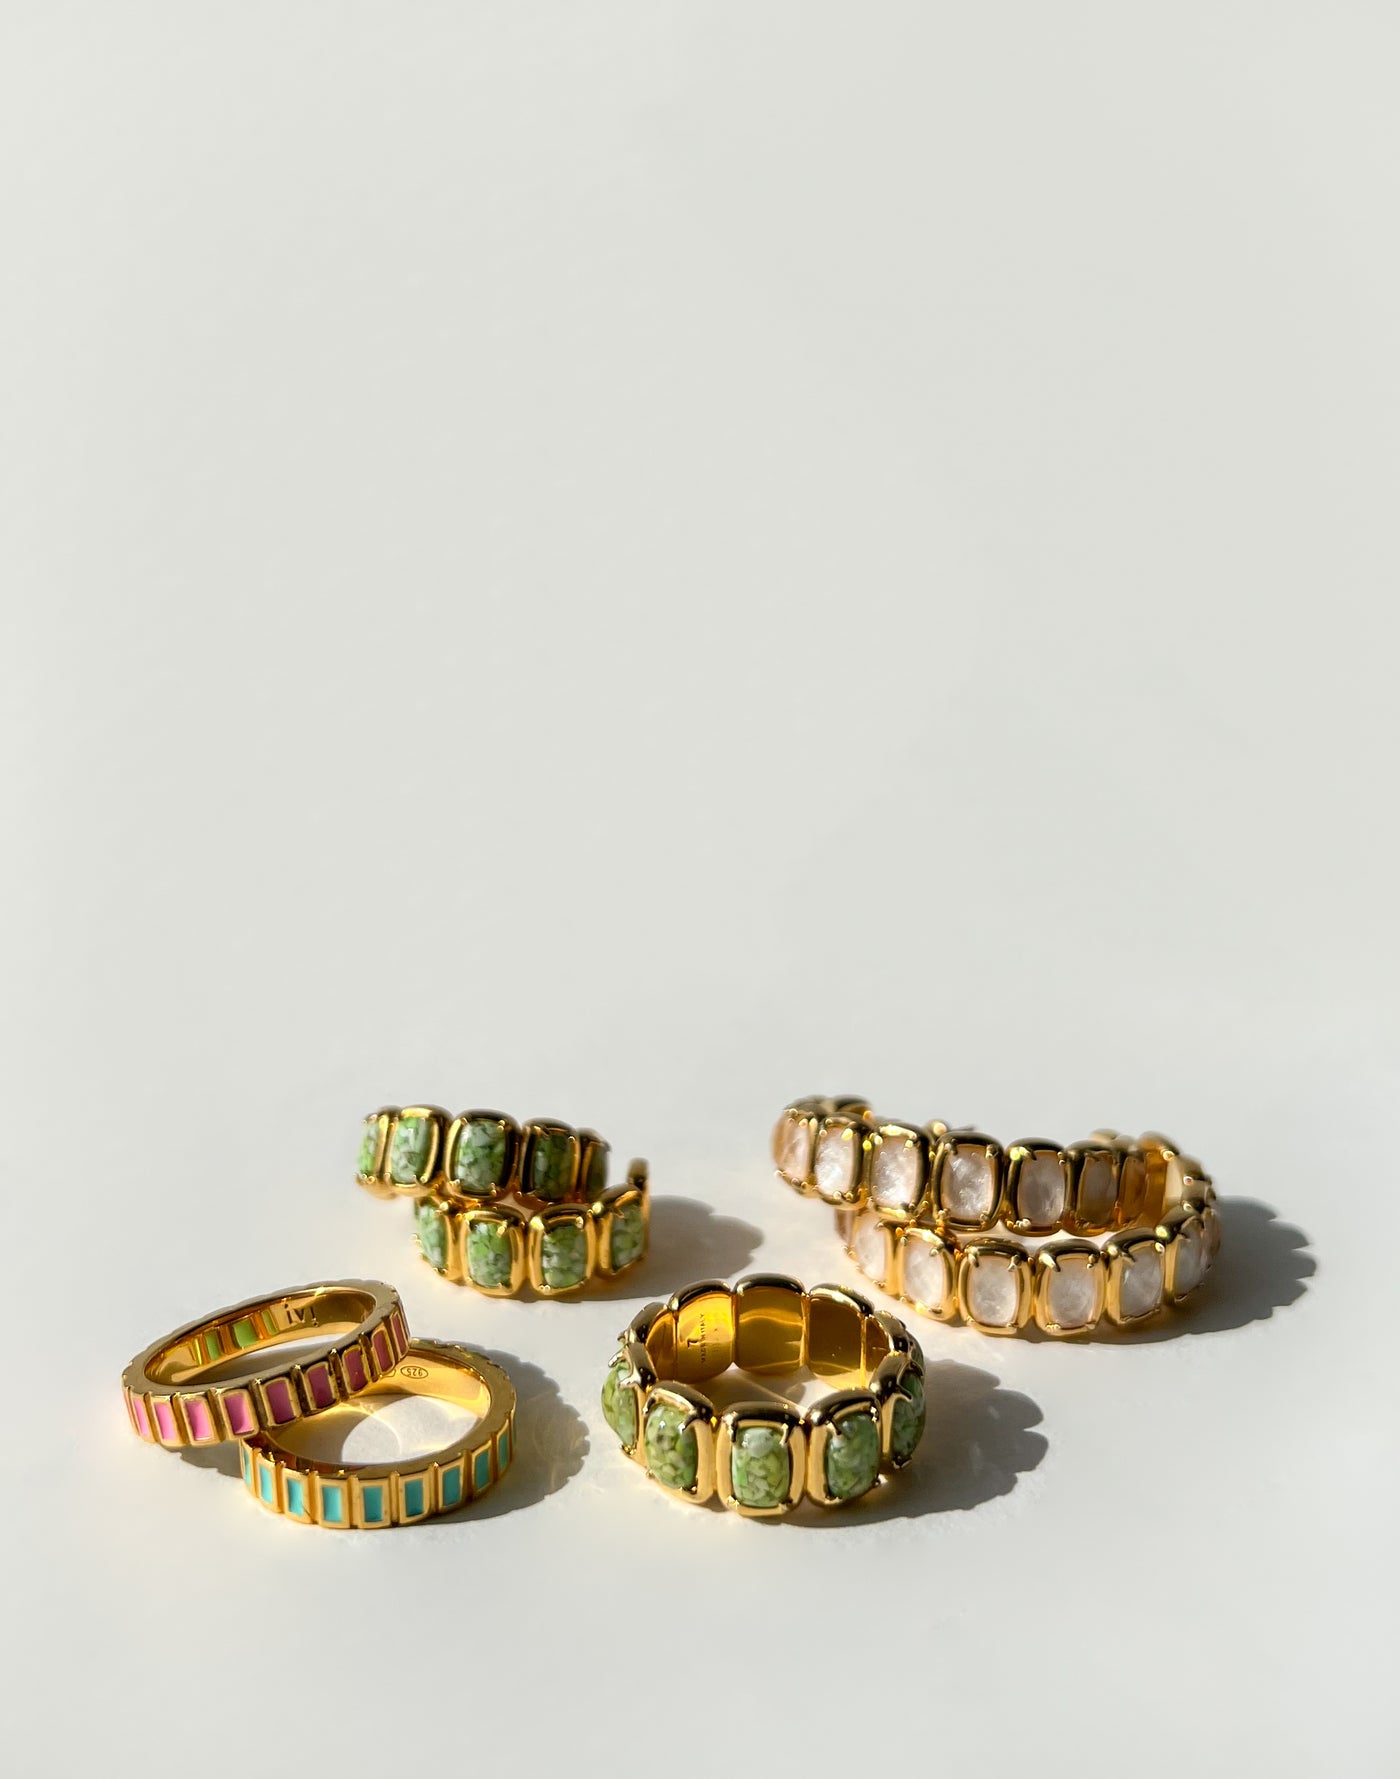 IVI Toy Ring in Serpentine - Discounts on IVI at UAL